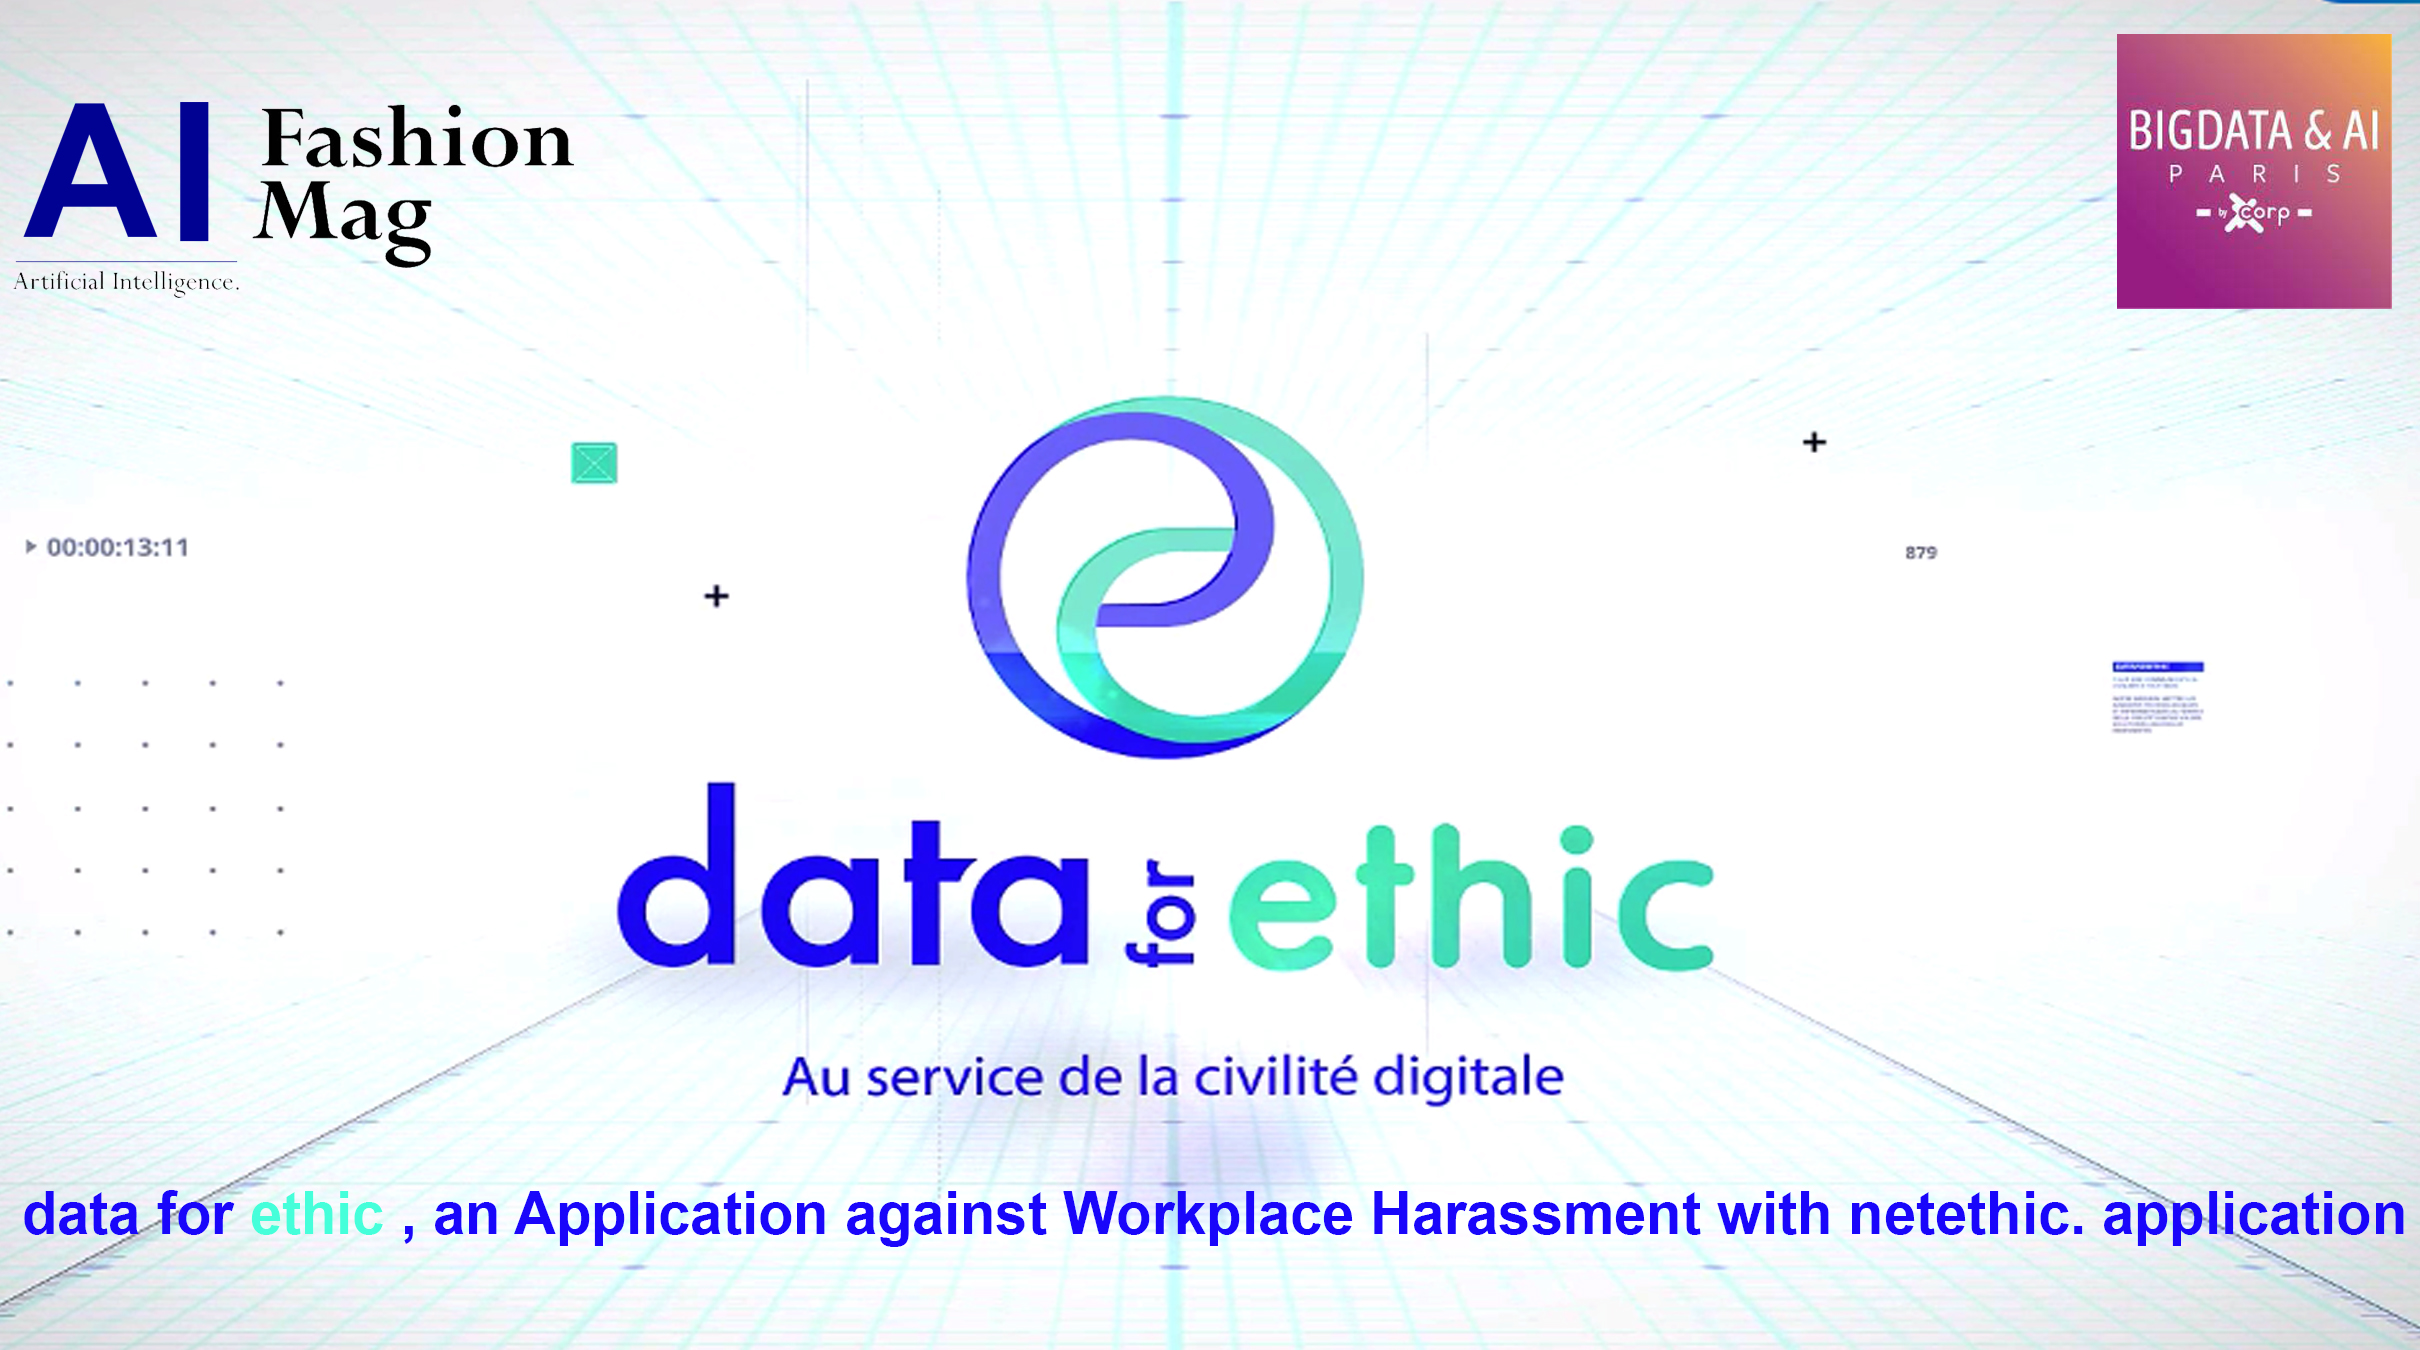 AFRICA-VOGUE-COVER-data-for-ethic-an-Application-against-Workplace-Harassment-with-netethic-application-2023-DN-AFRICA-Media-Partner